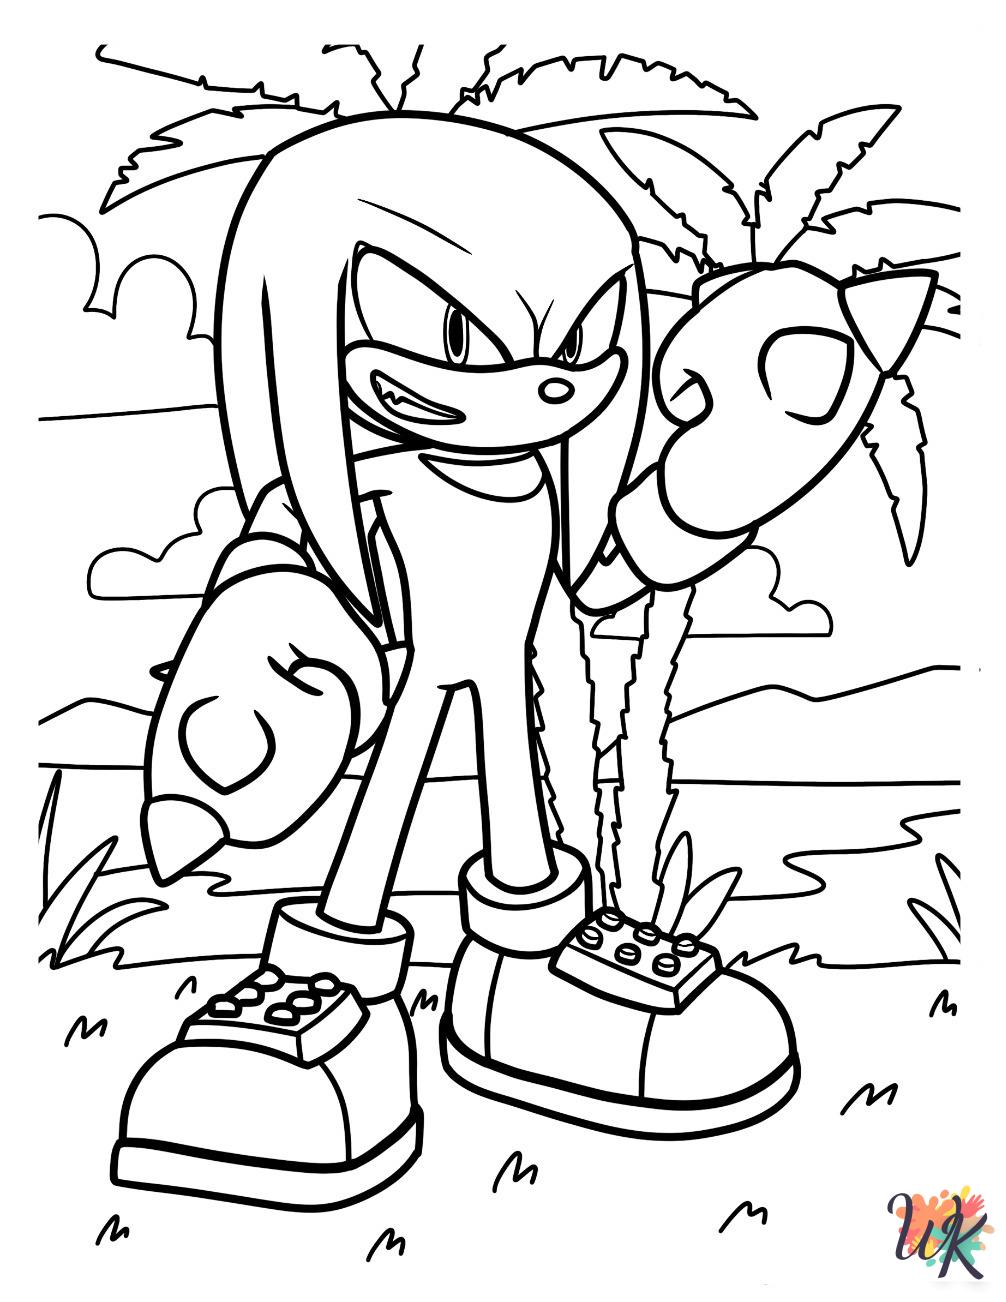 Knuckles coloring pages for preschoolers